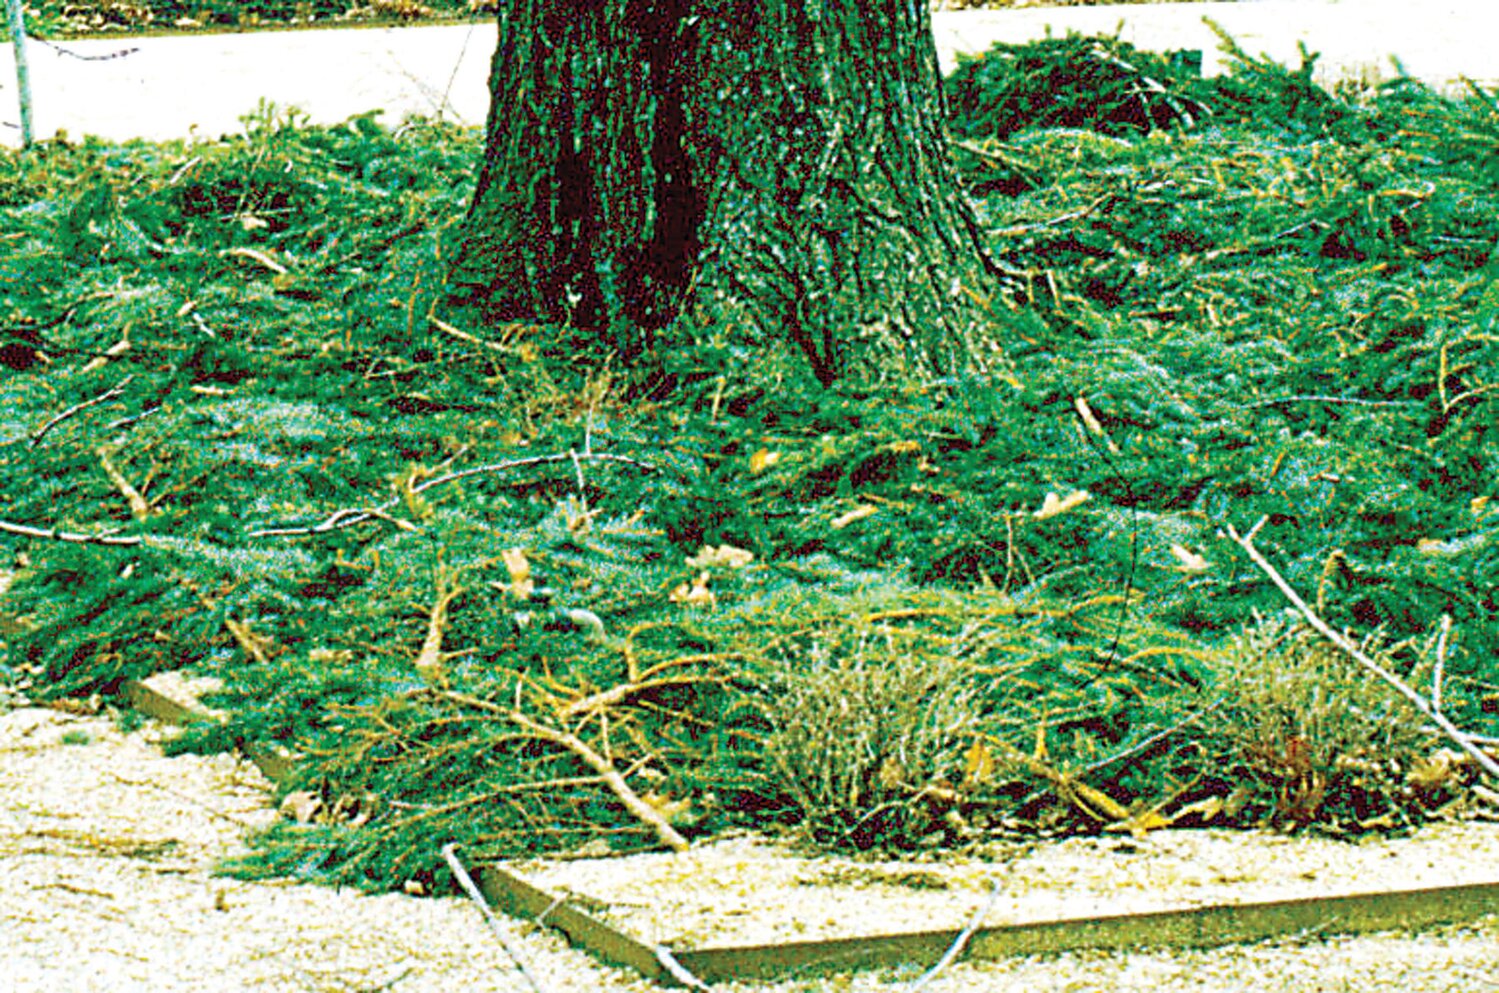 Removing the branches from Christmas trees and layering them over bulbs and perennials keeps the soil consistently cold, reducing the risk of early sprouting and winter damage.